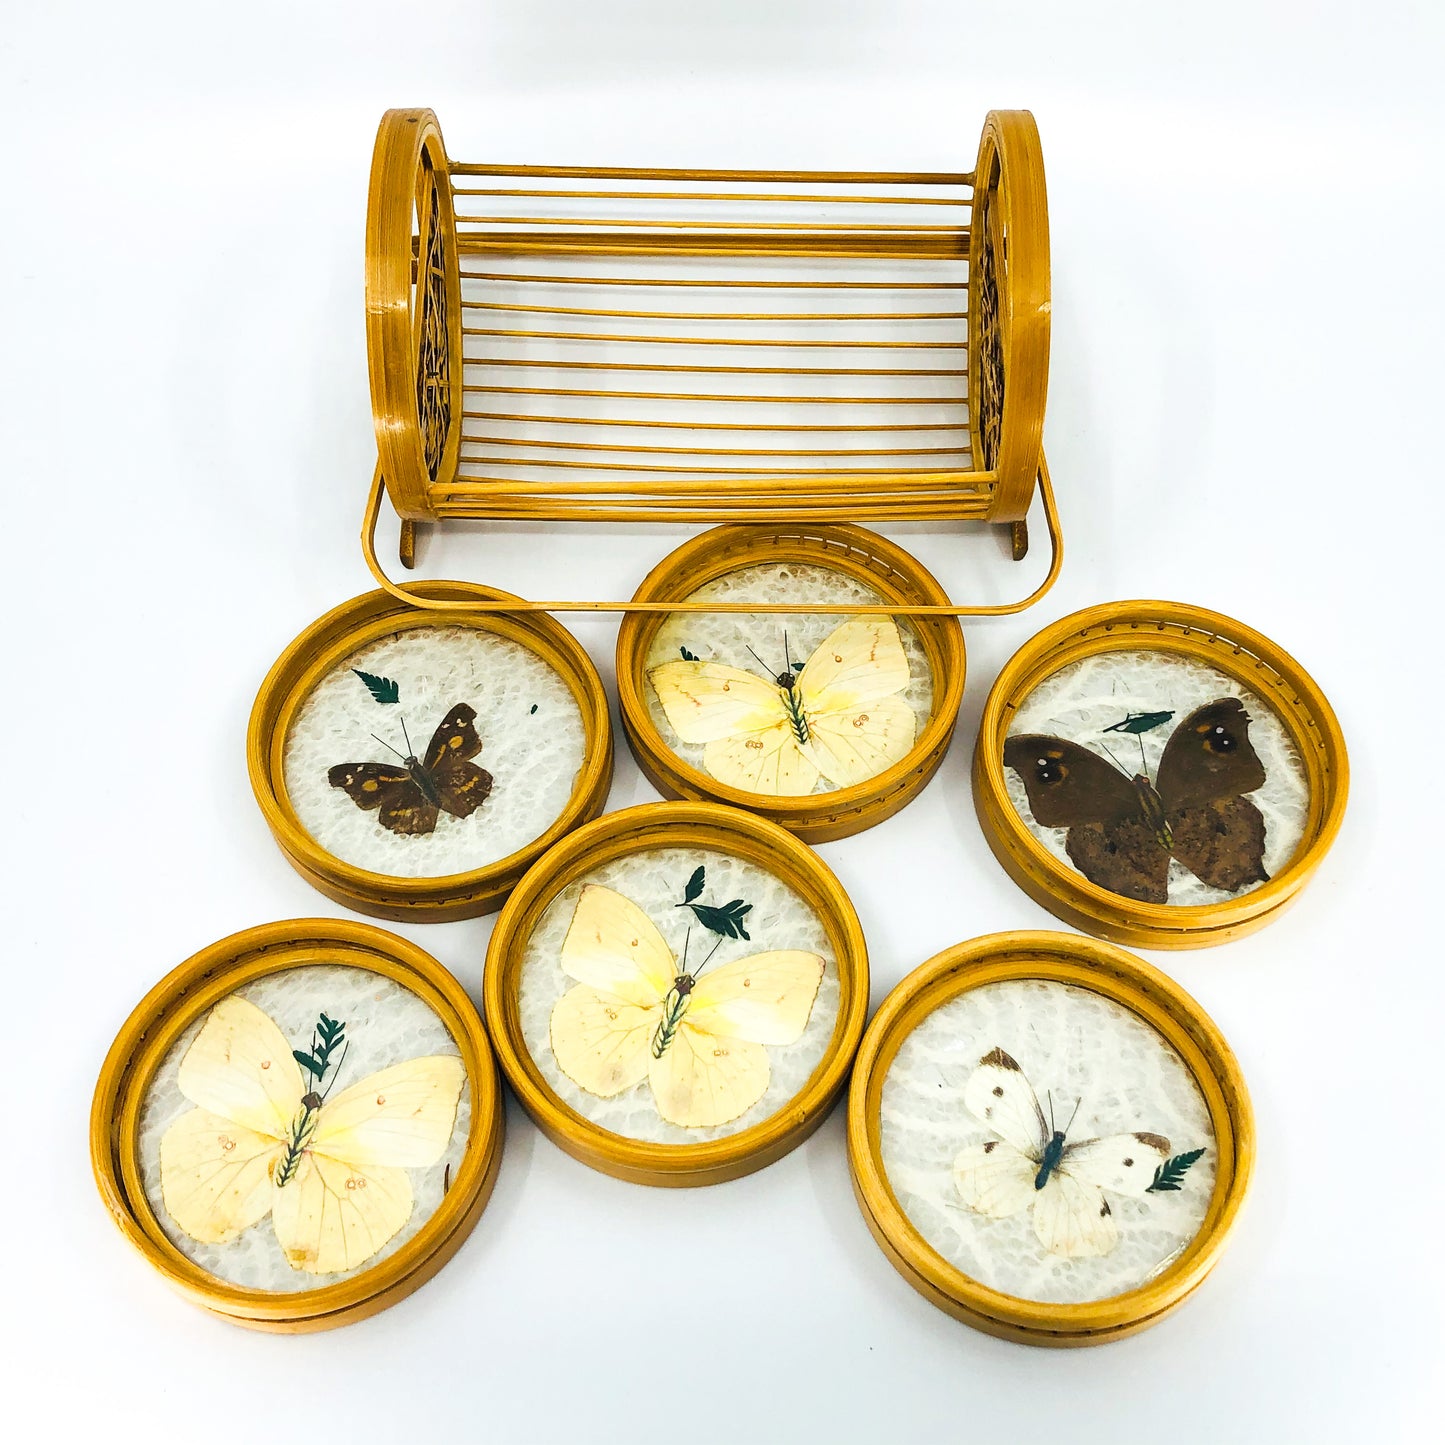 S/6 Vintage Rattan Butterfly Coasters with Caddy